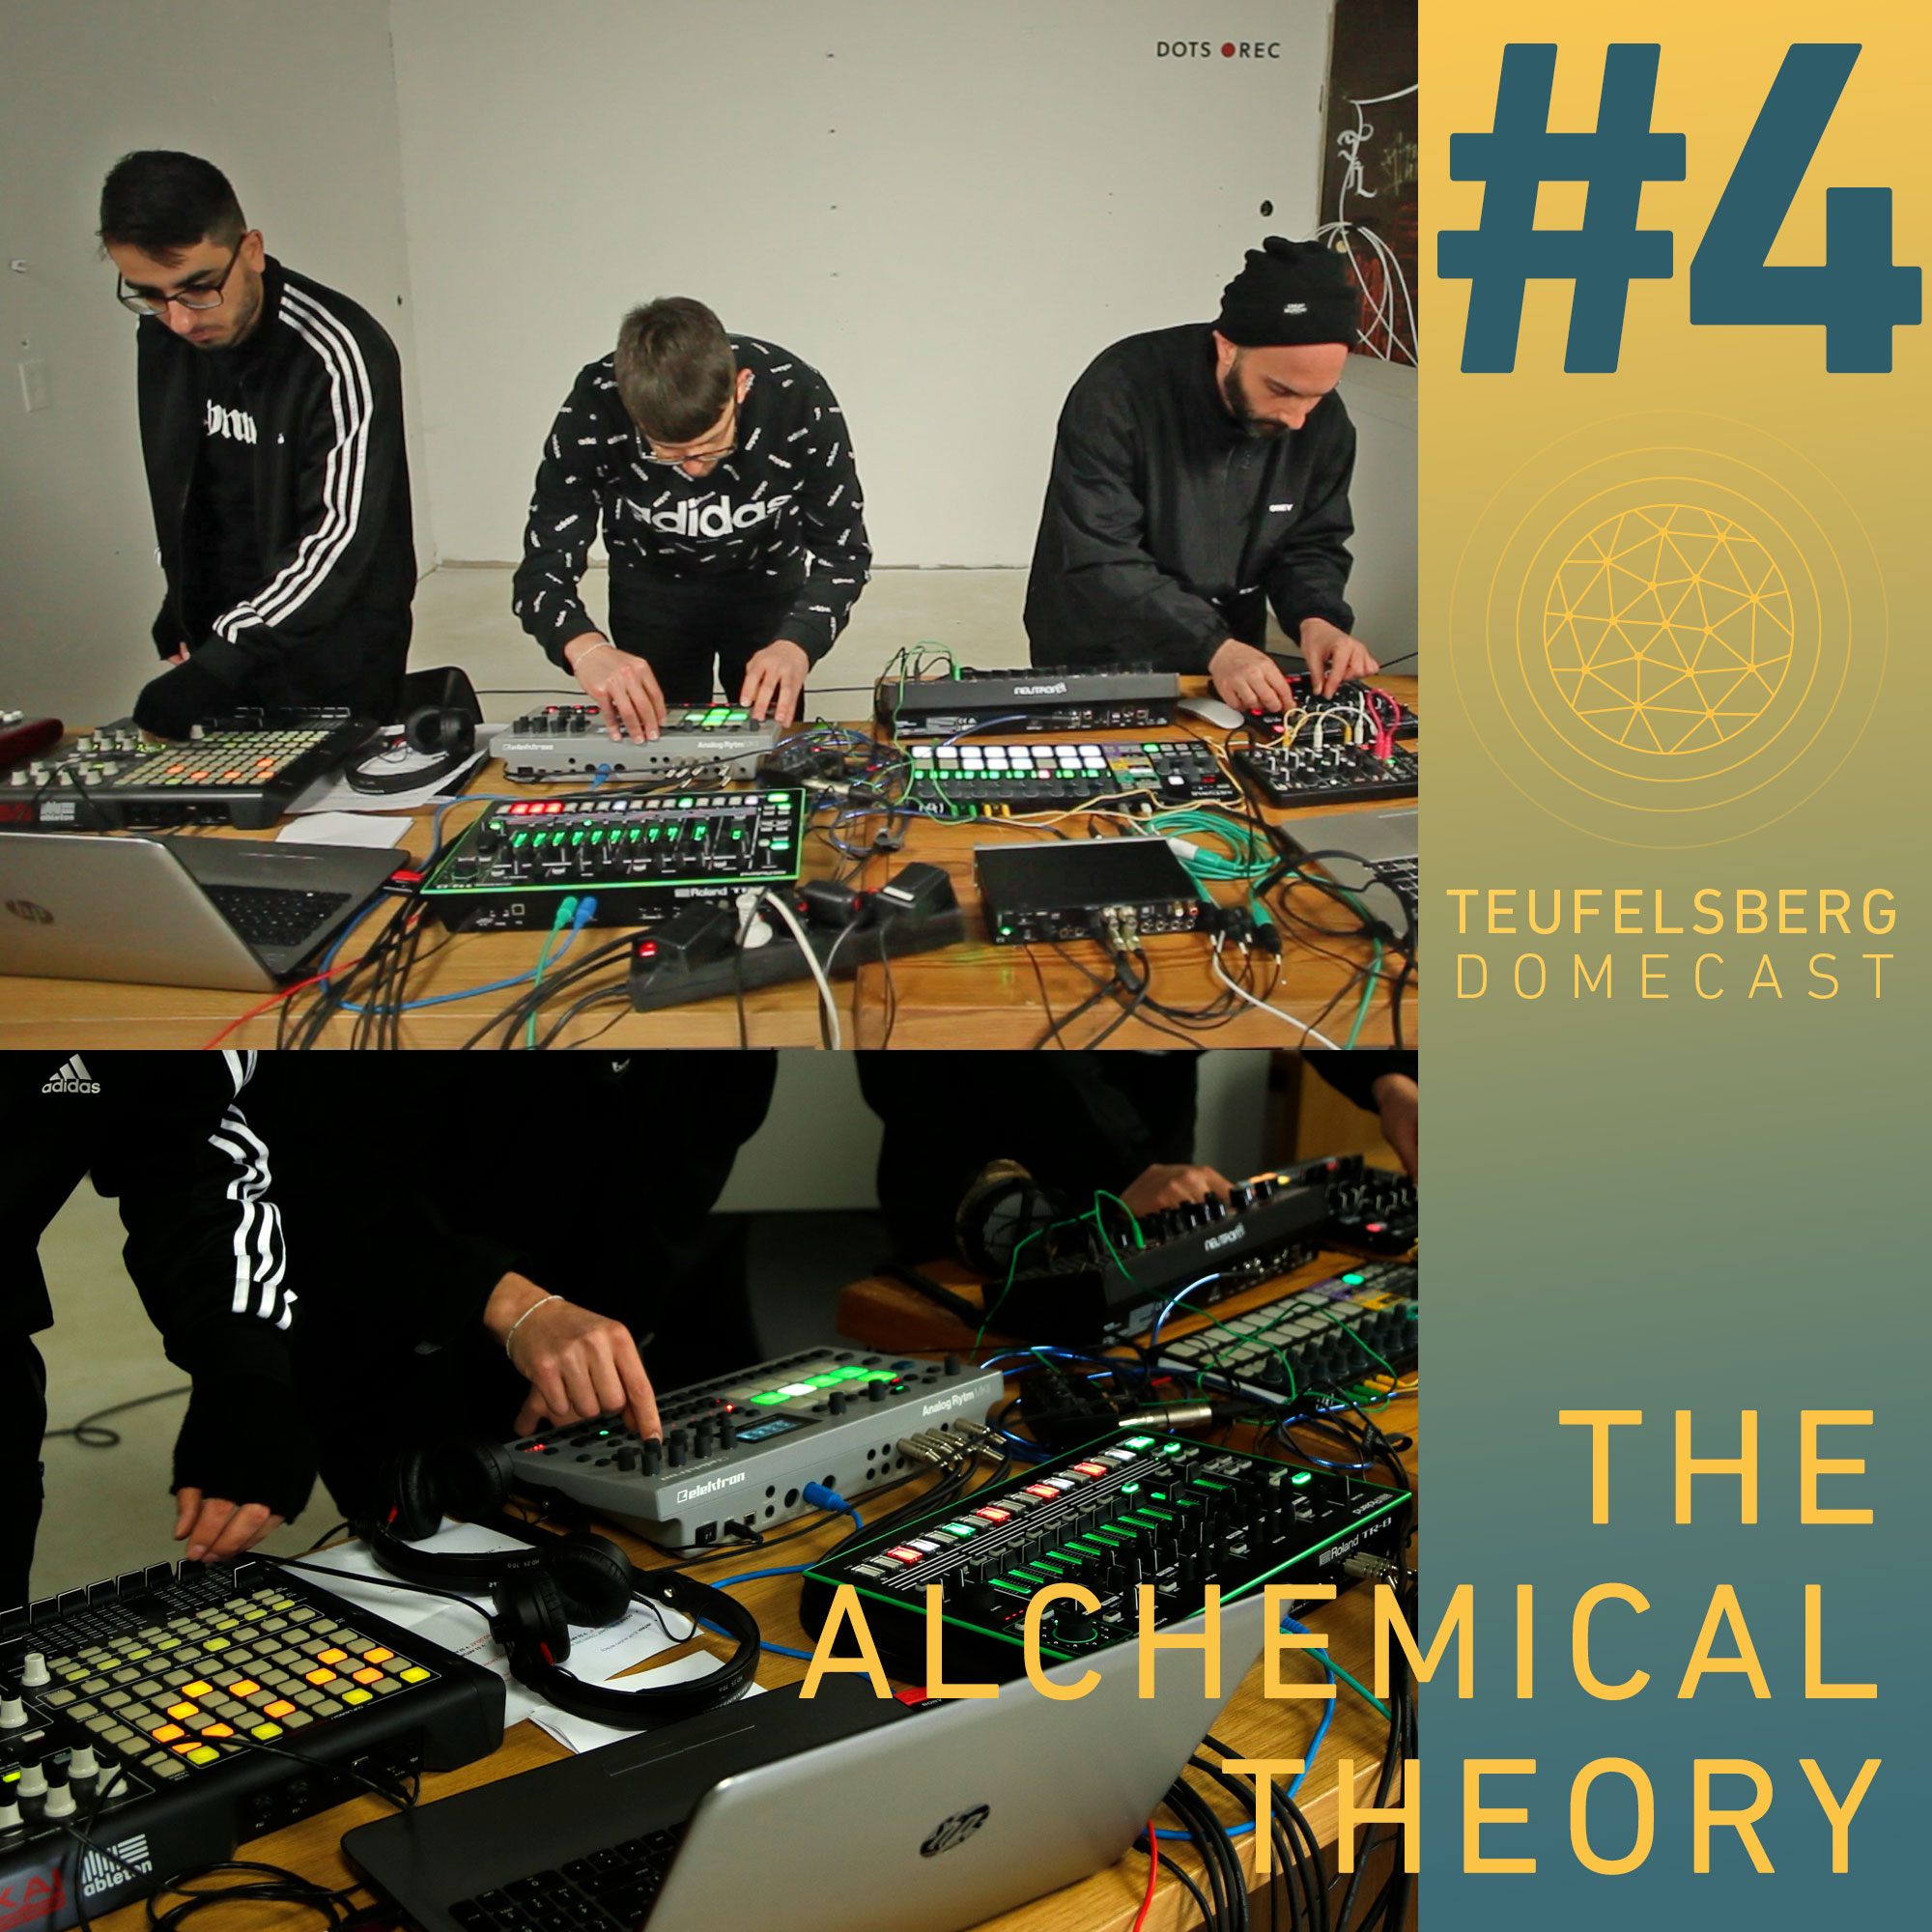 The Alchemical Theory – Domecast #4